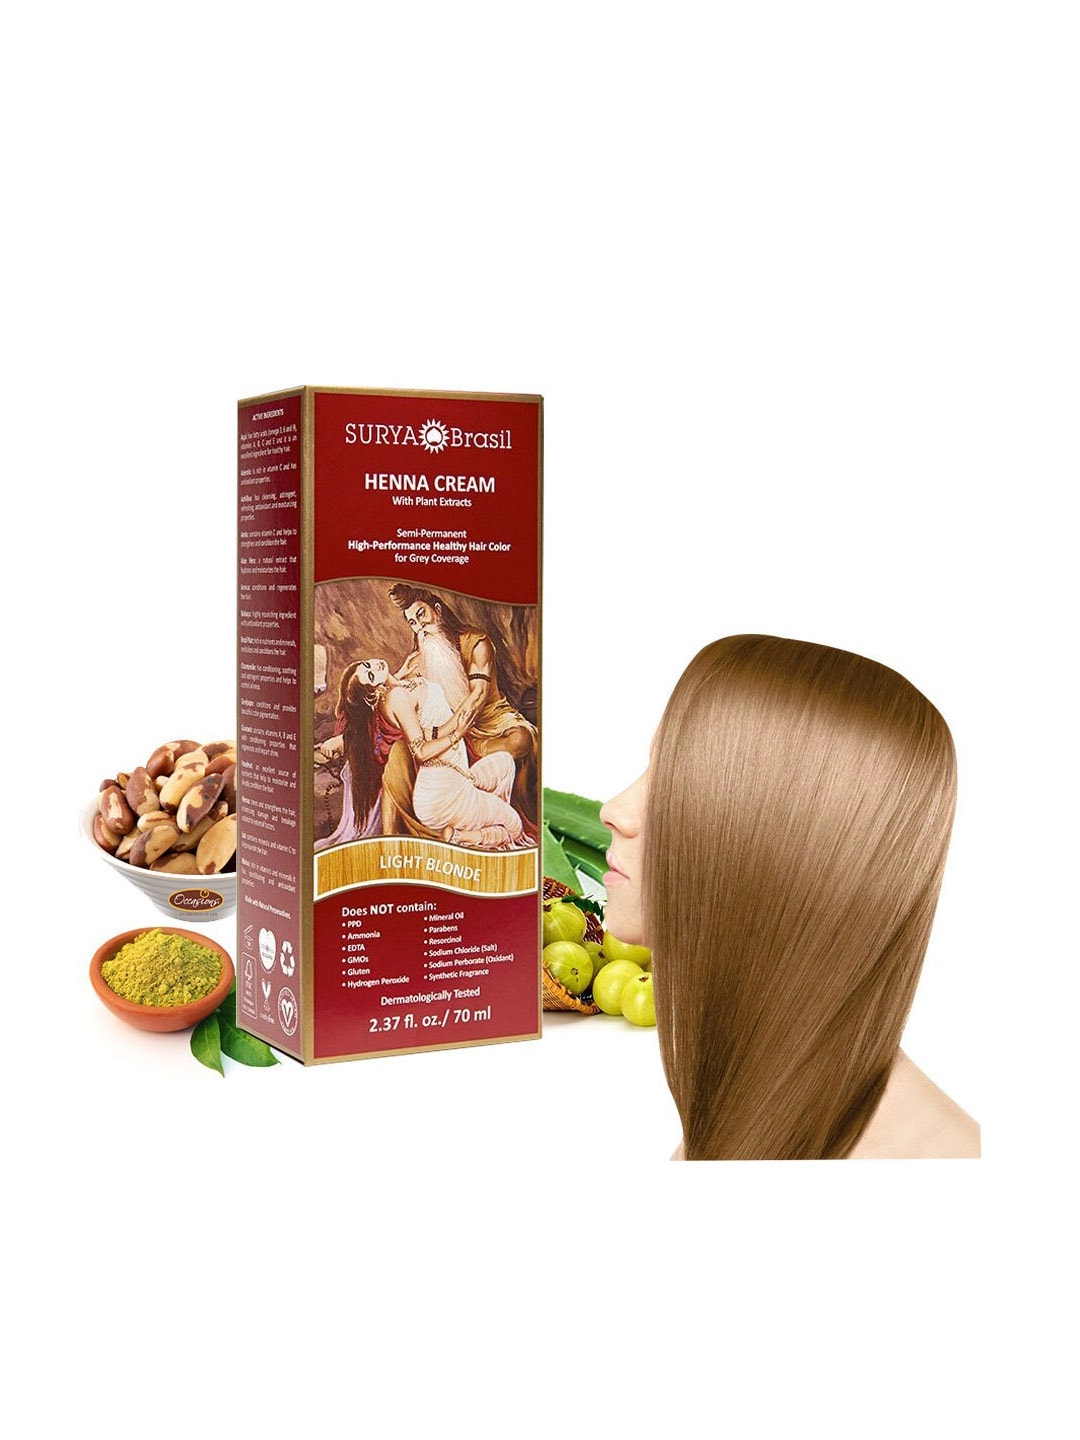 SURYA Brasil Henna Cream Semi-Permanent Hair Color with Plant Extracts 70ml - Light Blonde Price in India